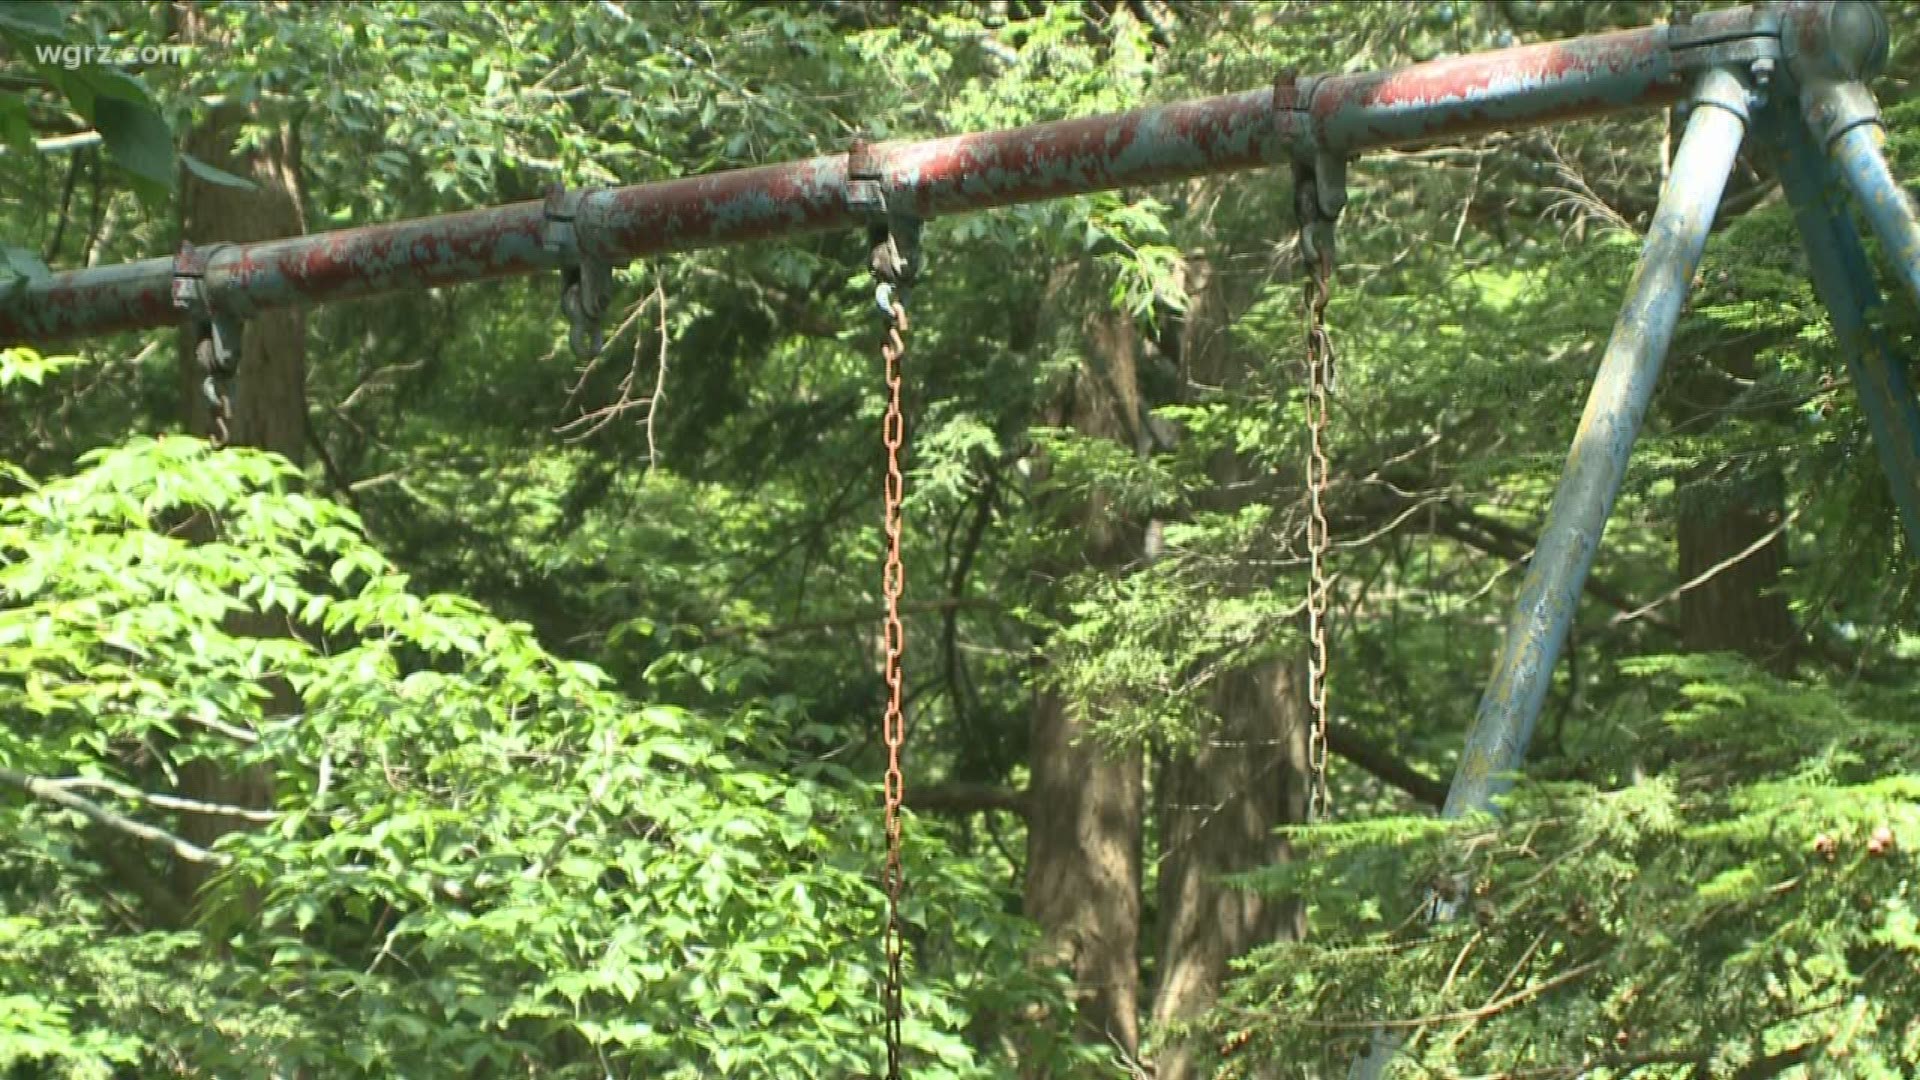 Chestnut Ridge Park -- and found 22 pieces of equipment tested positive for lead.